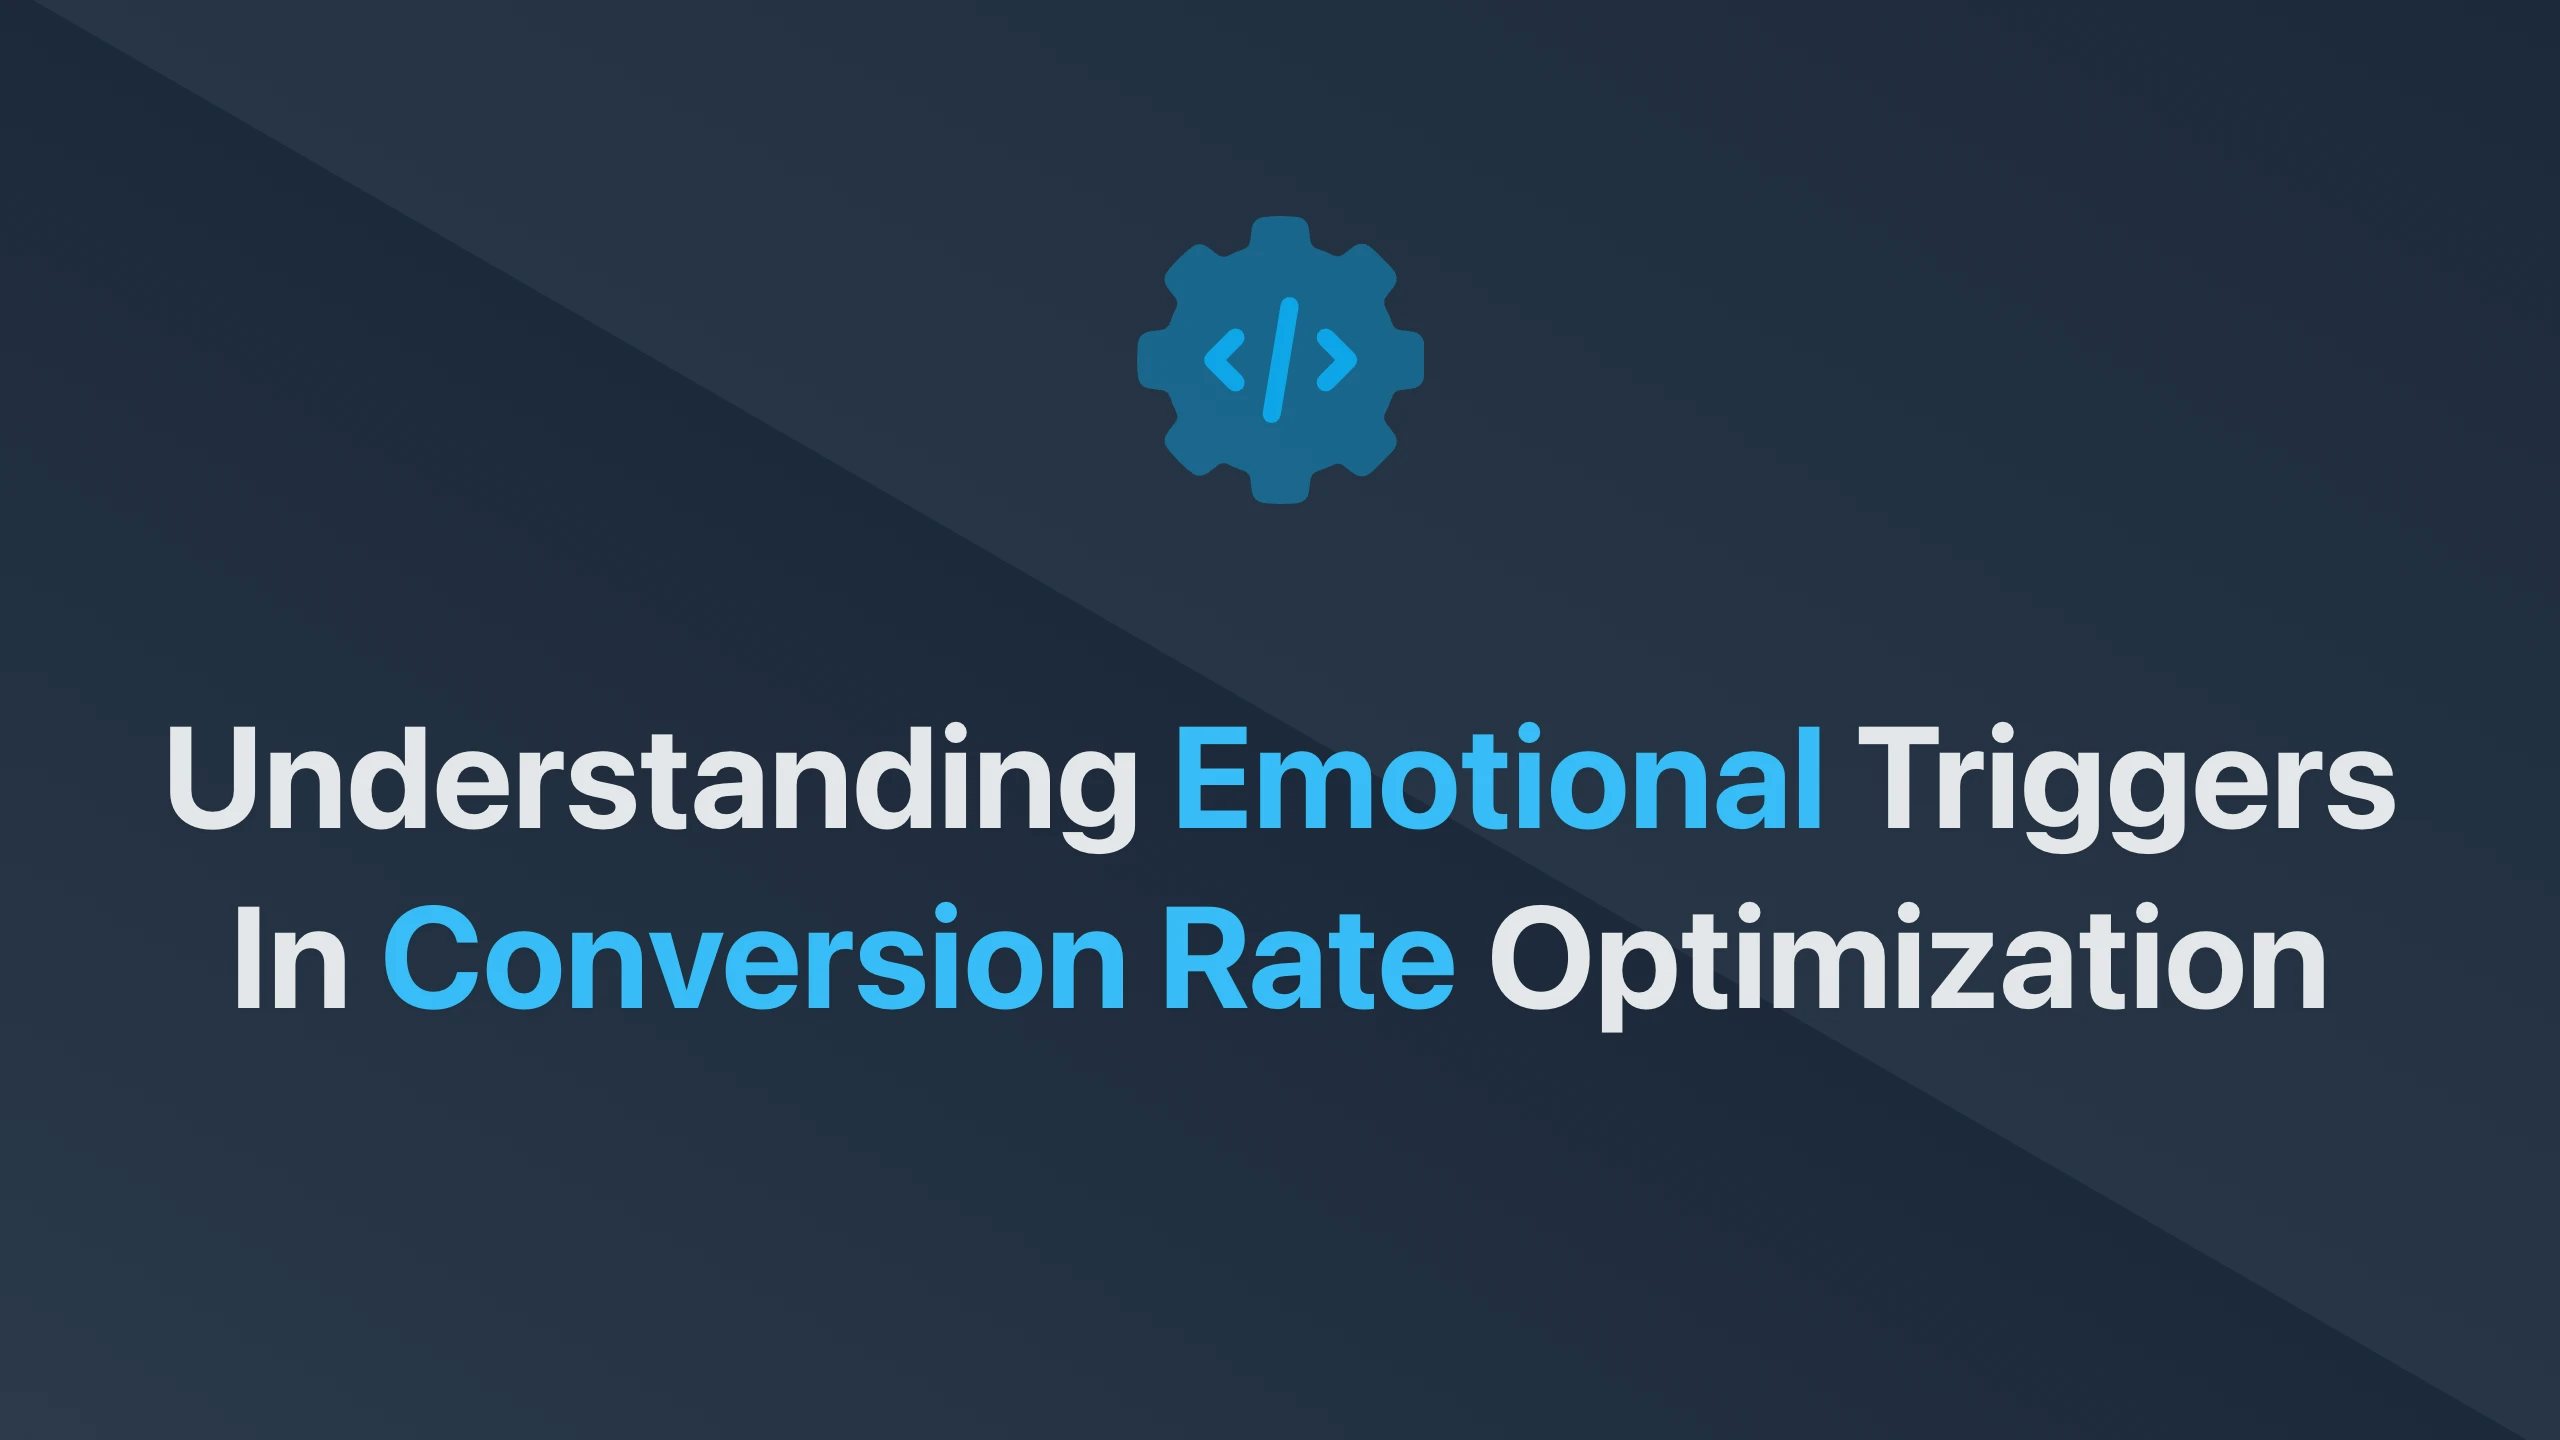 Cover Image for Understanding Emotional Triggers in Conversion Rate Optimization